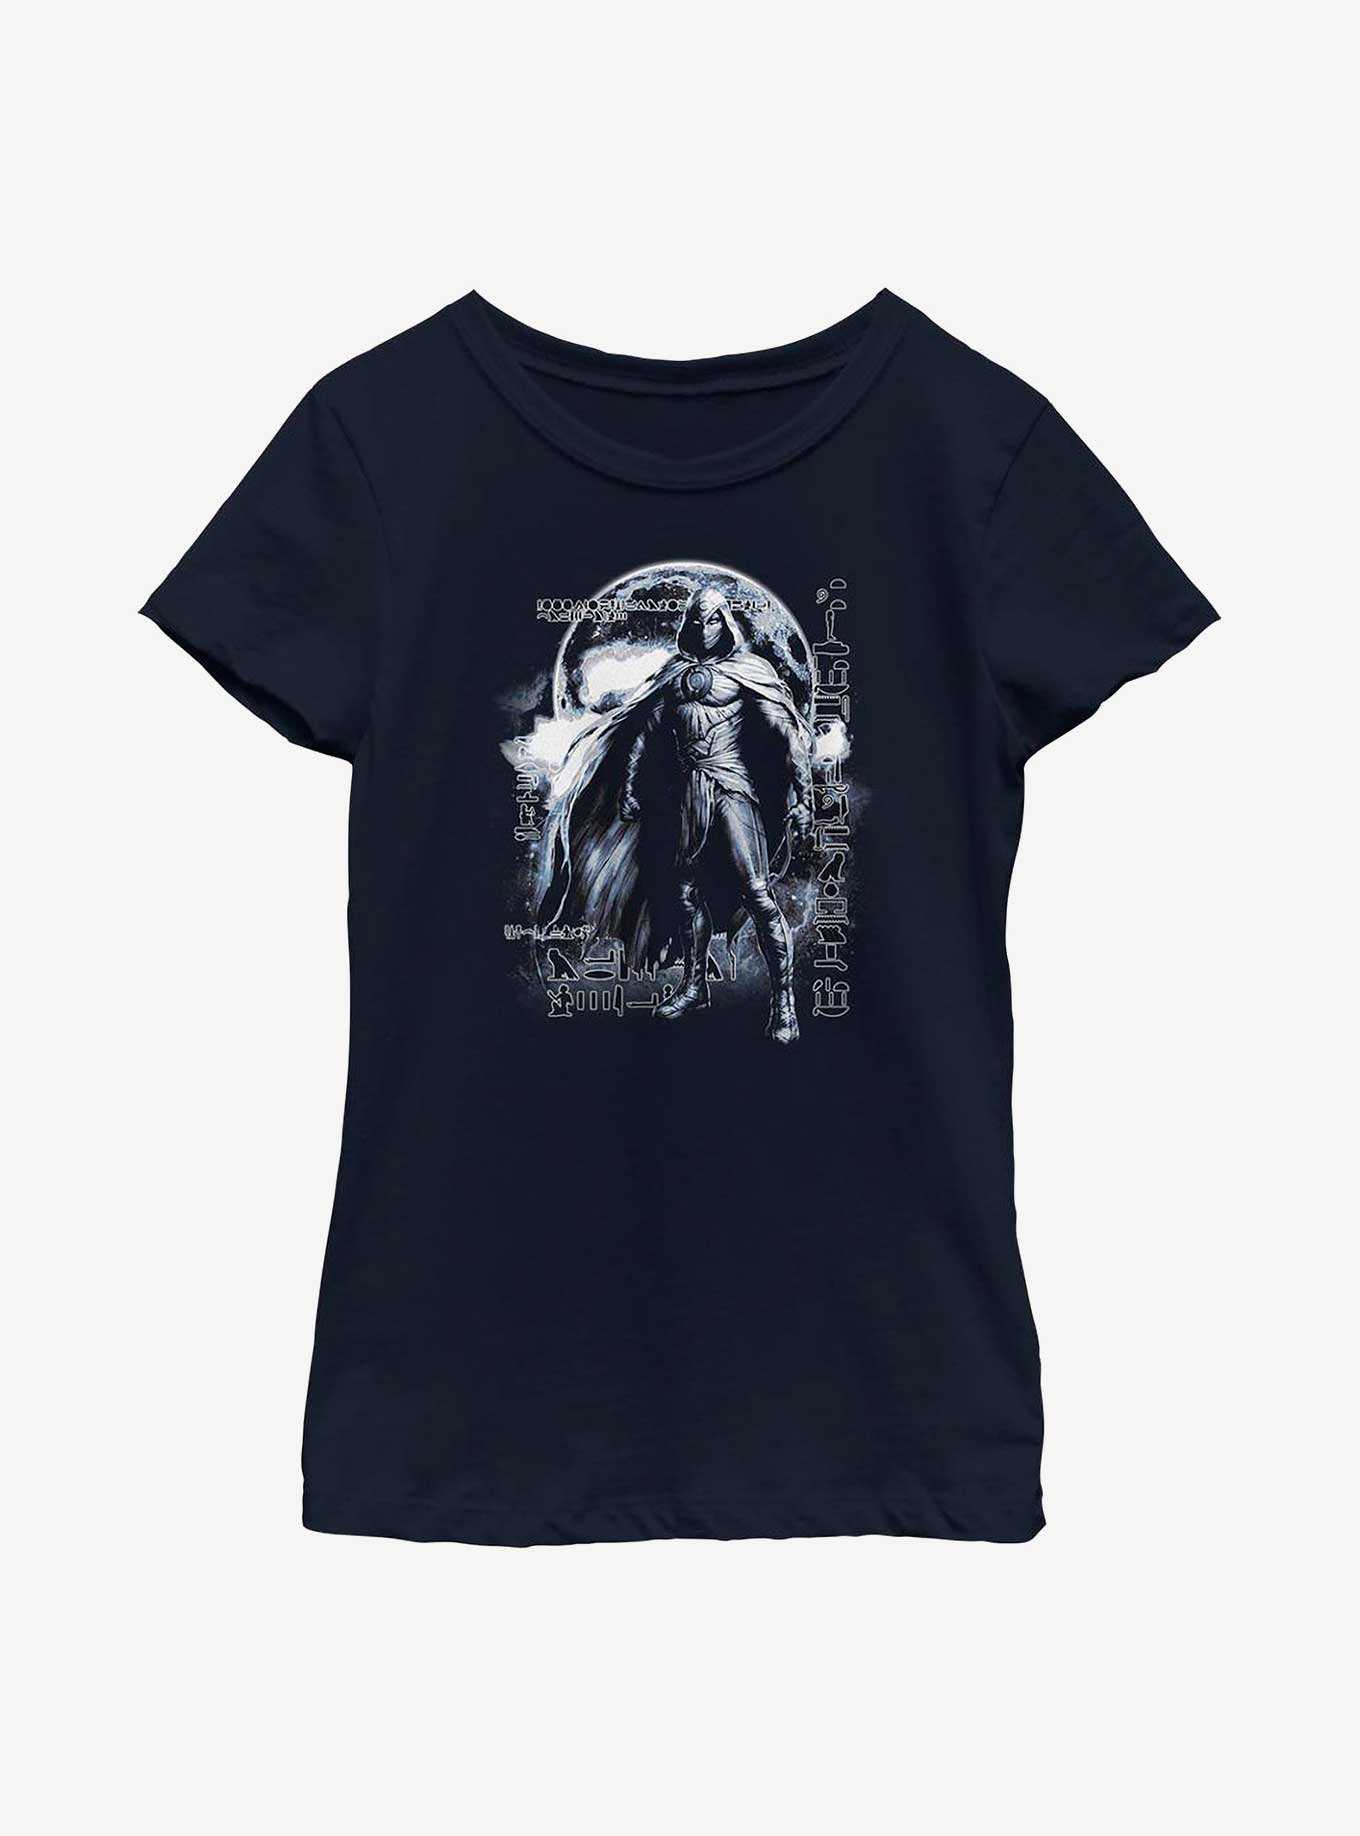 Marvel Moon Knight In The Night Youth Girls T-Shirt, , hi-res